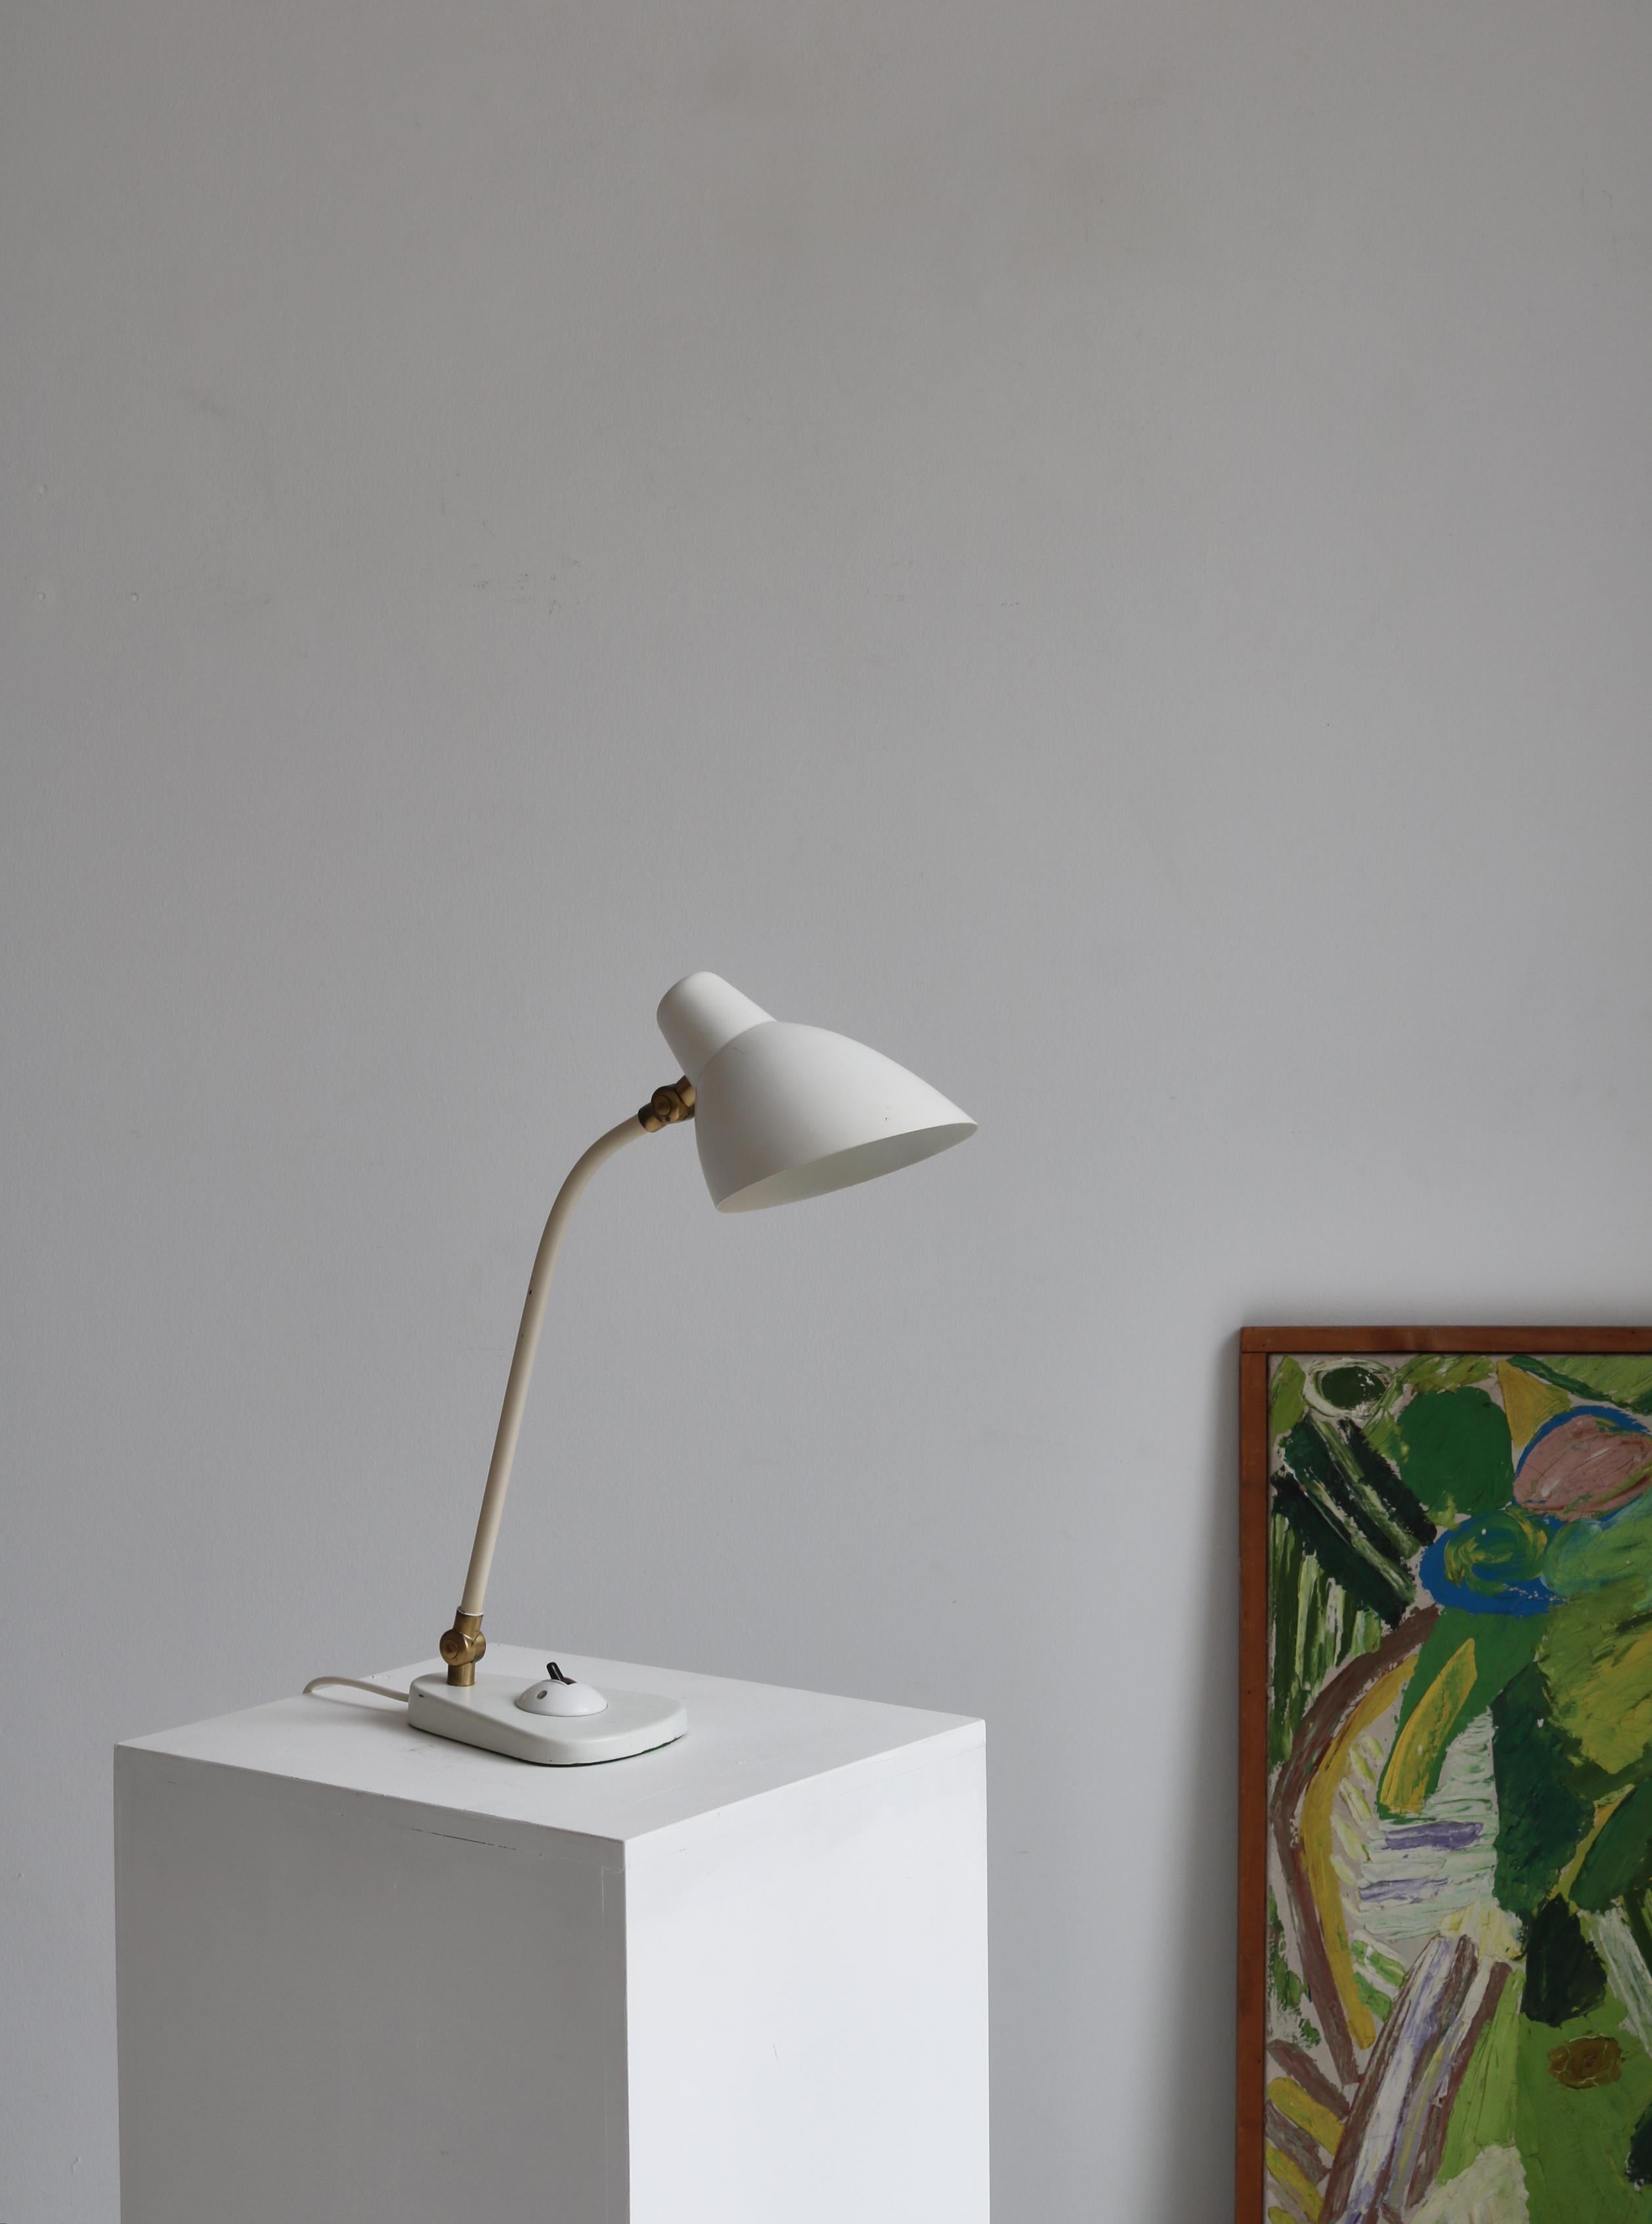 Functionalist desk lamp designed by Danish Architect Vilhelm Lauritzen in the late 1940s. Made for 